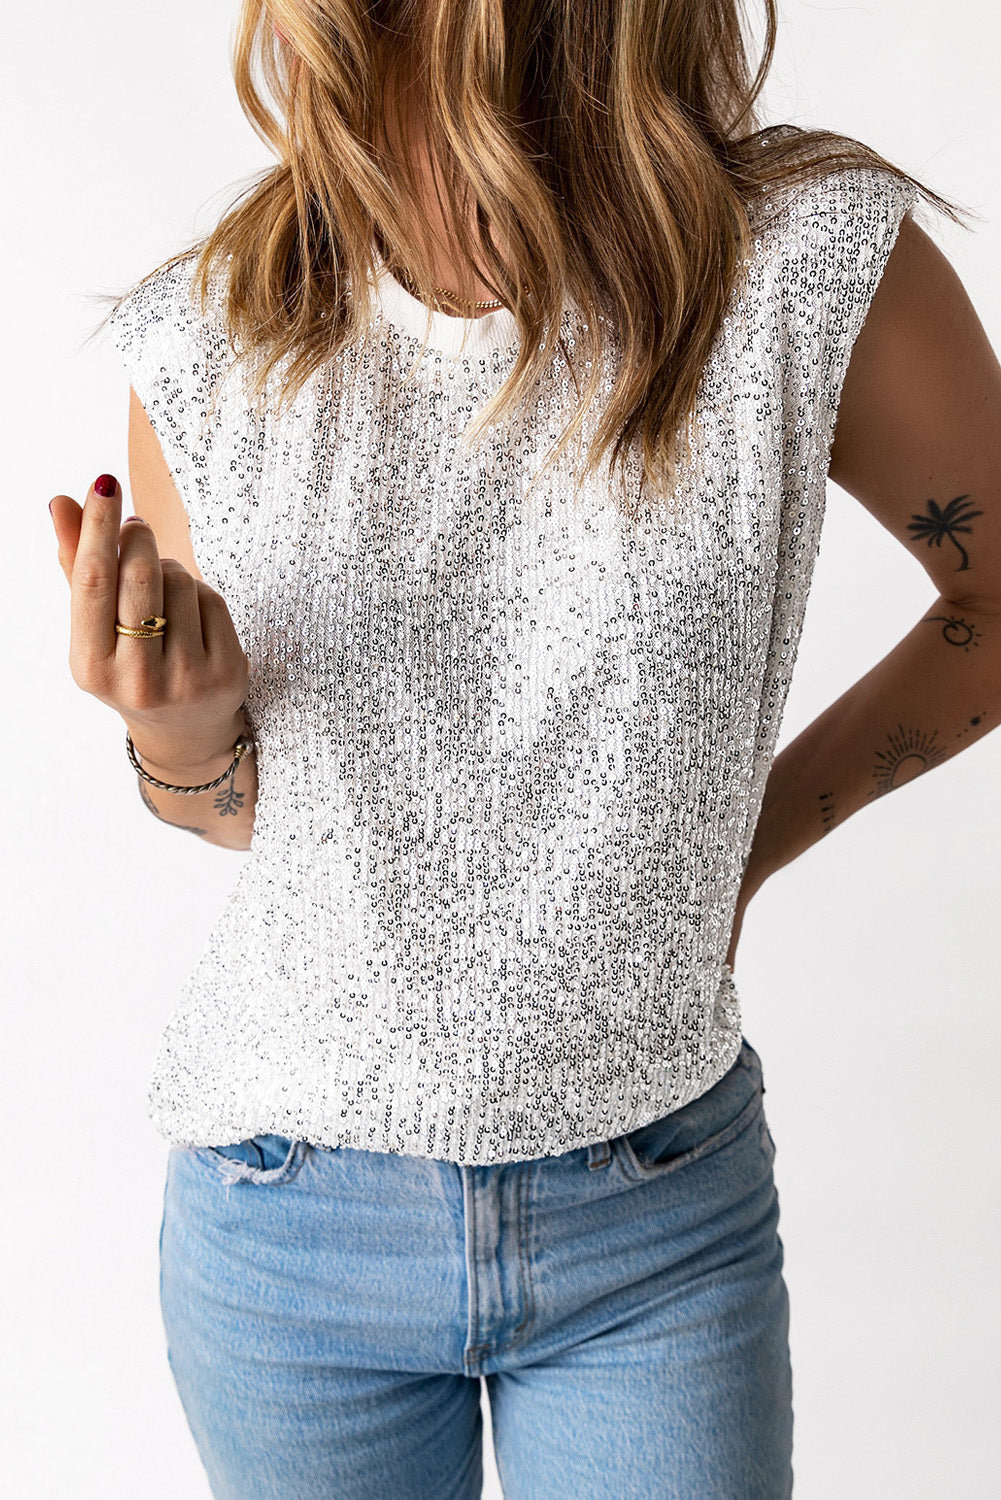 Summer Shani Sequin Capped Sleeve Tank - 3 Colors